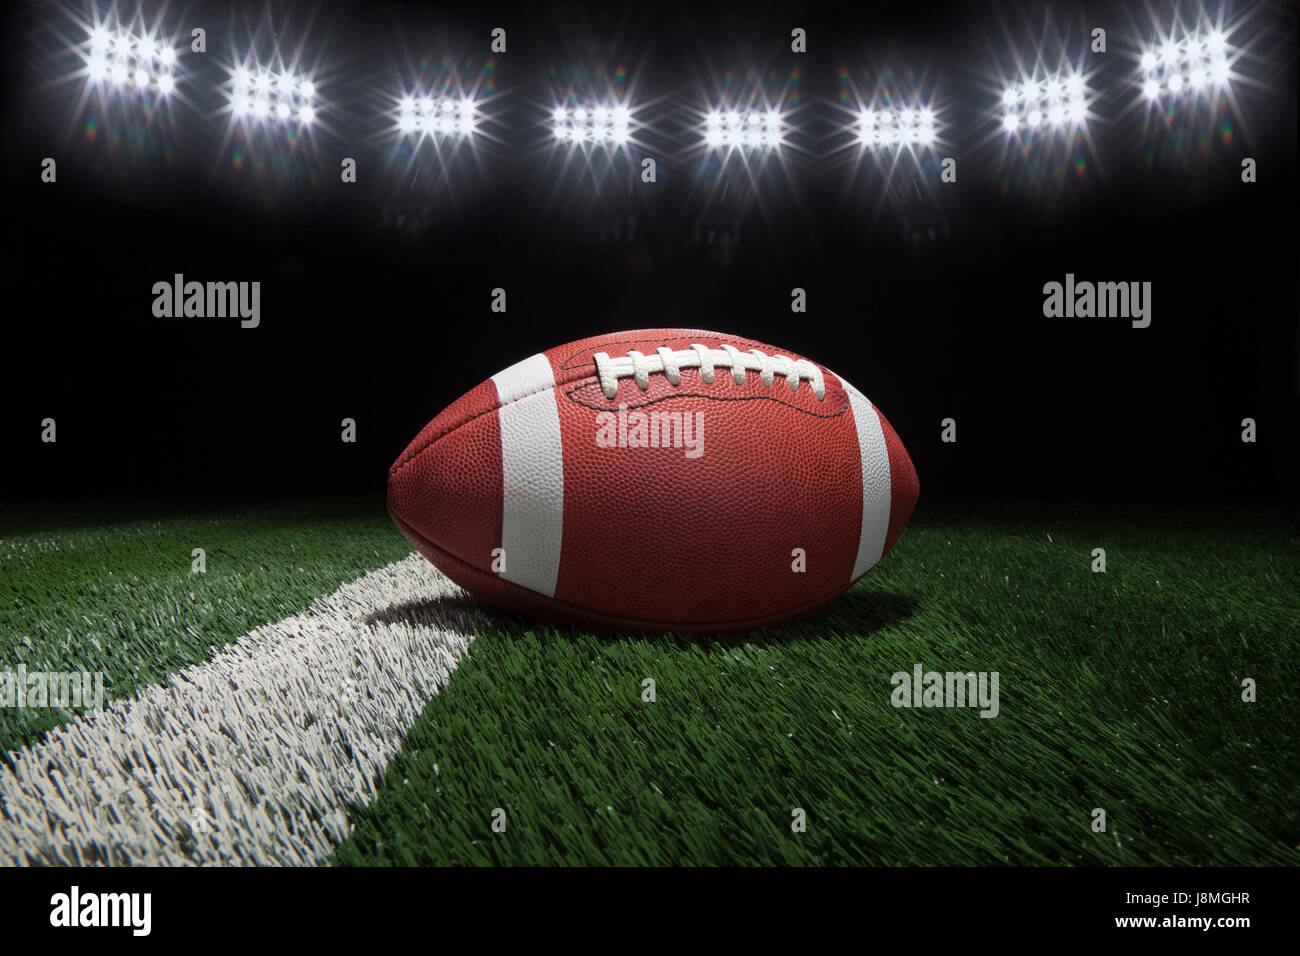 Low angle view of college style football on a yard line of a football field under stadium lights Stock Photo